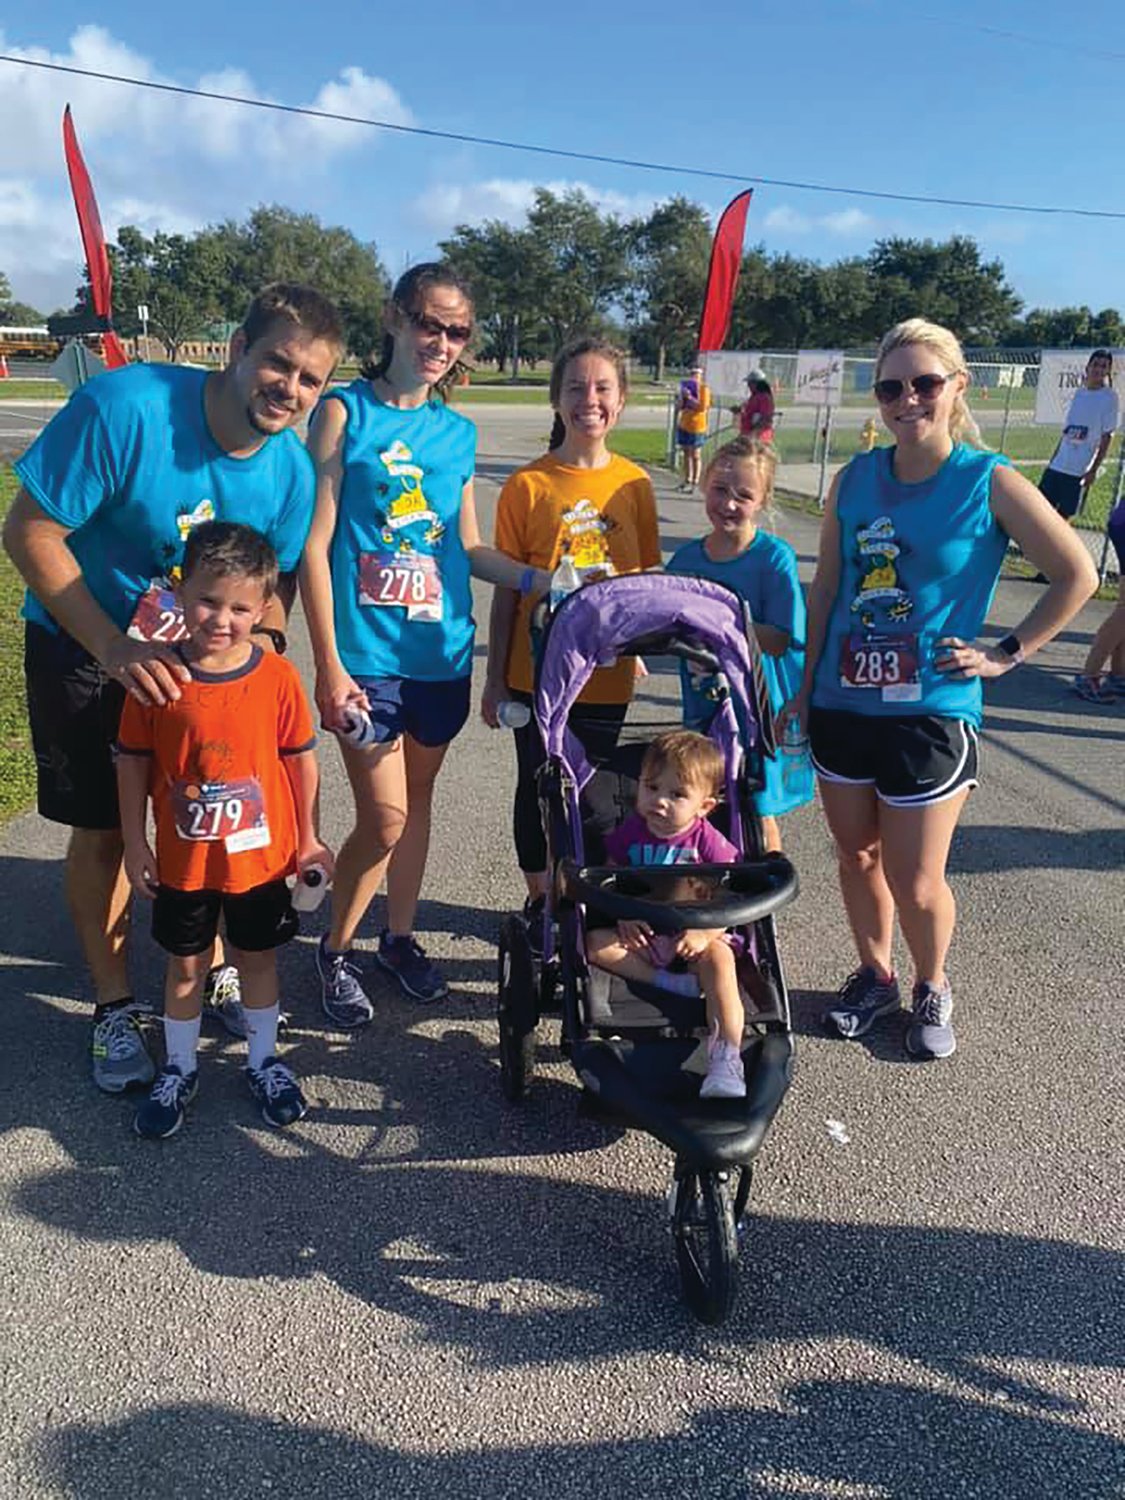 Even children can run 5Ks. Levi and Natalie Hoglo have already run two this year.